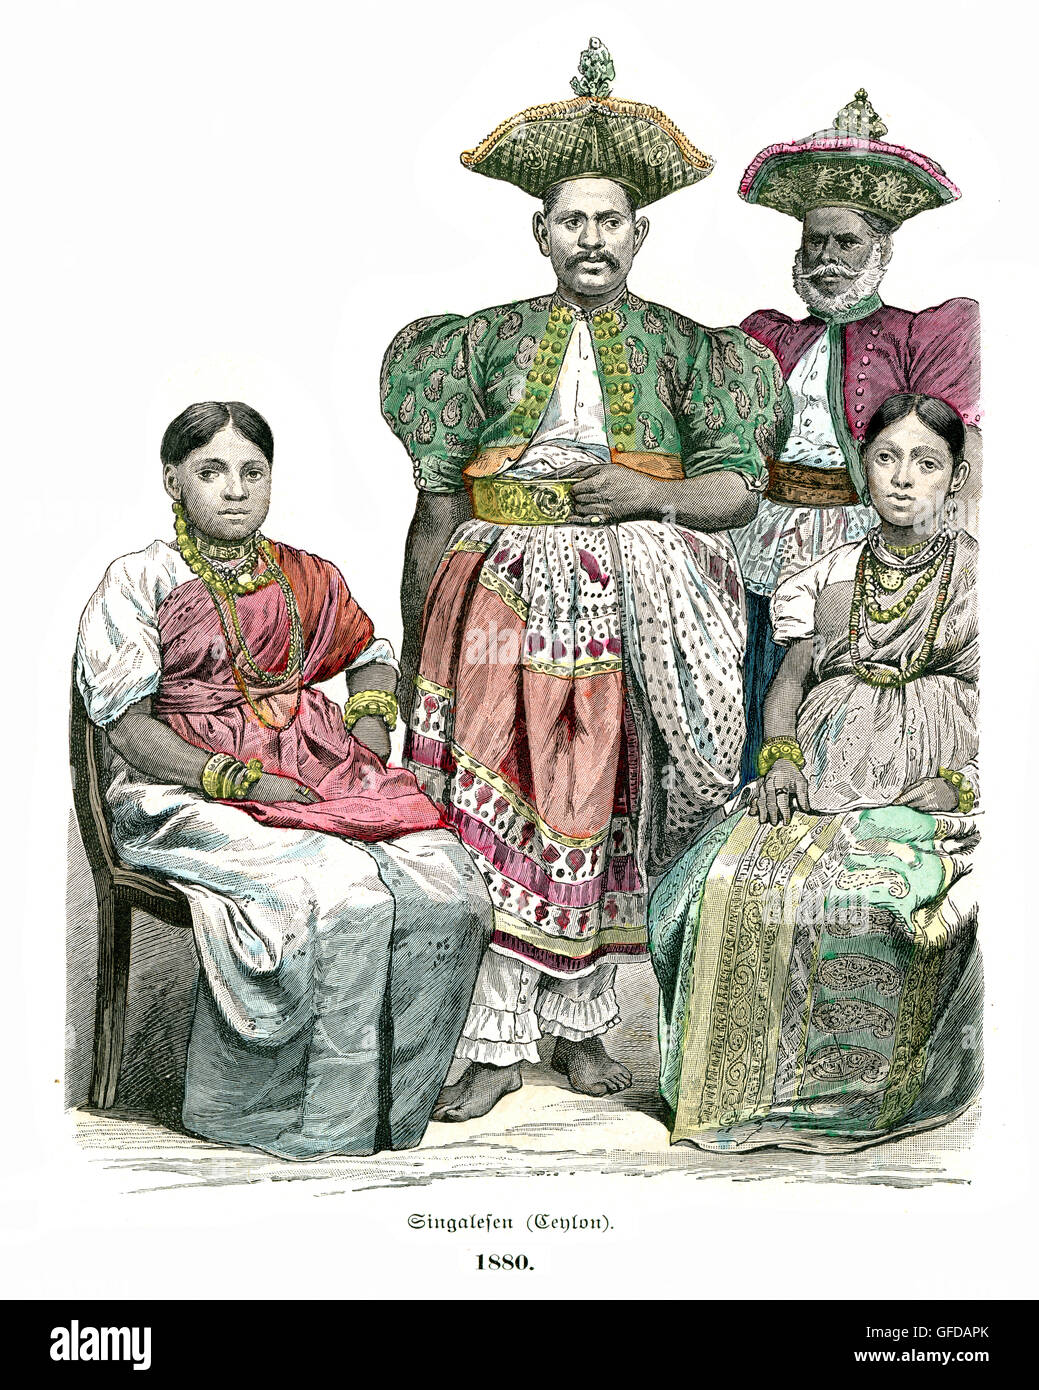 Family in the traditional dress of Ceylon (Sri Lanka) in the 19th Century Stock Photo